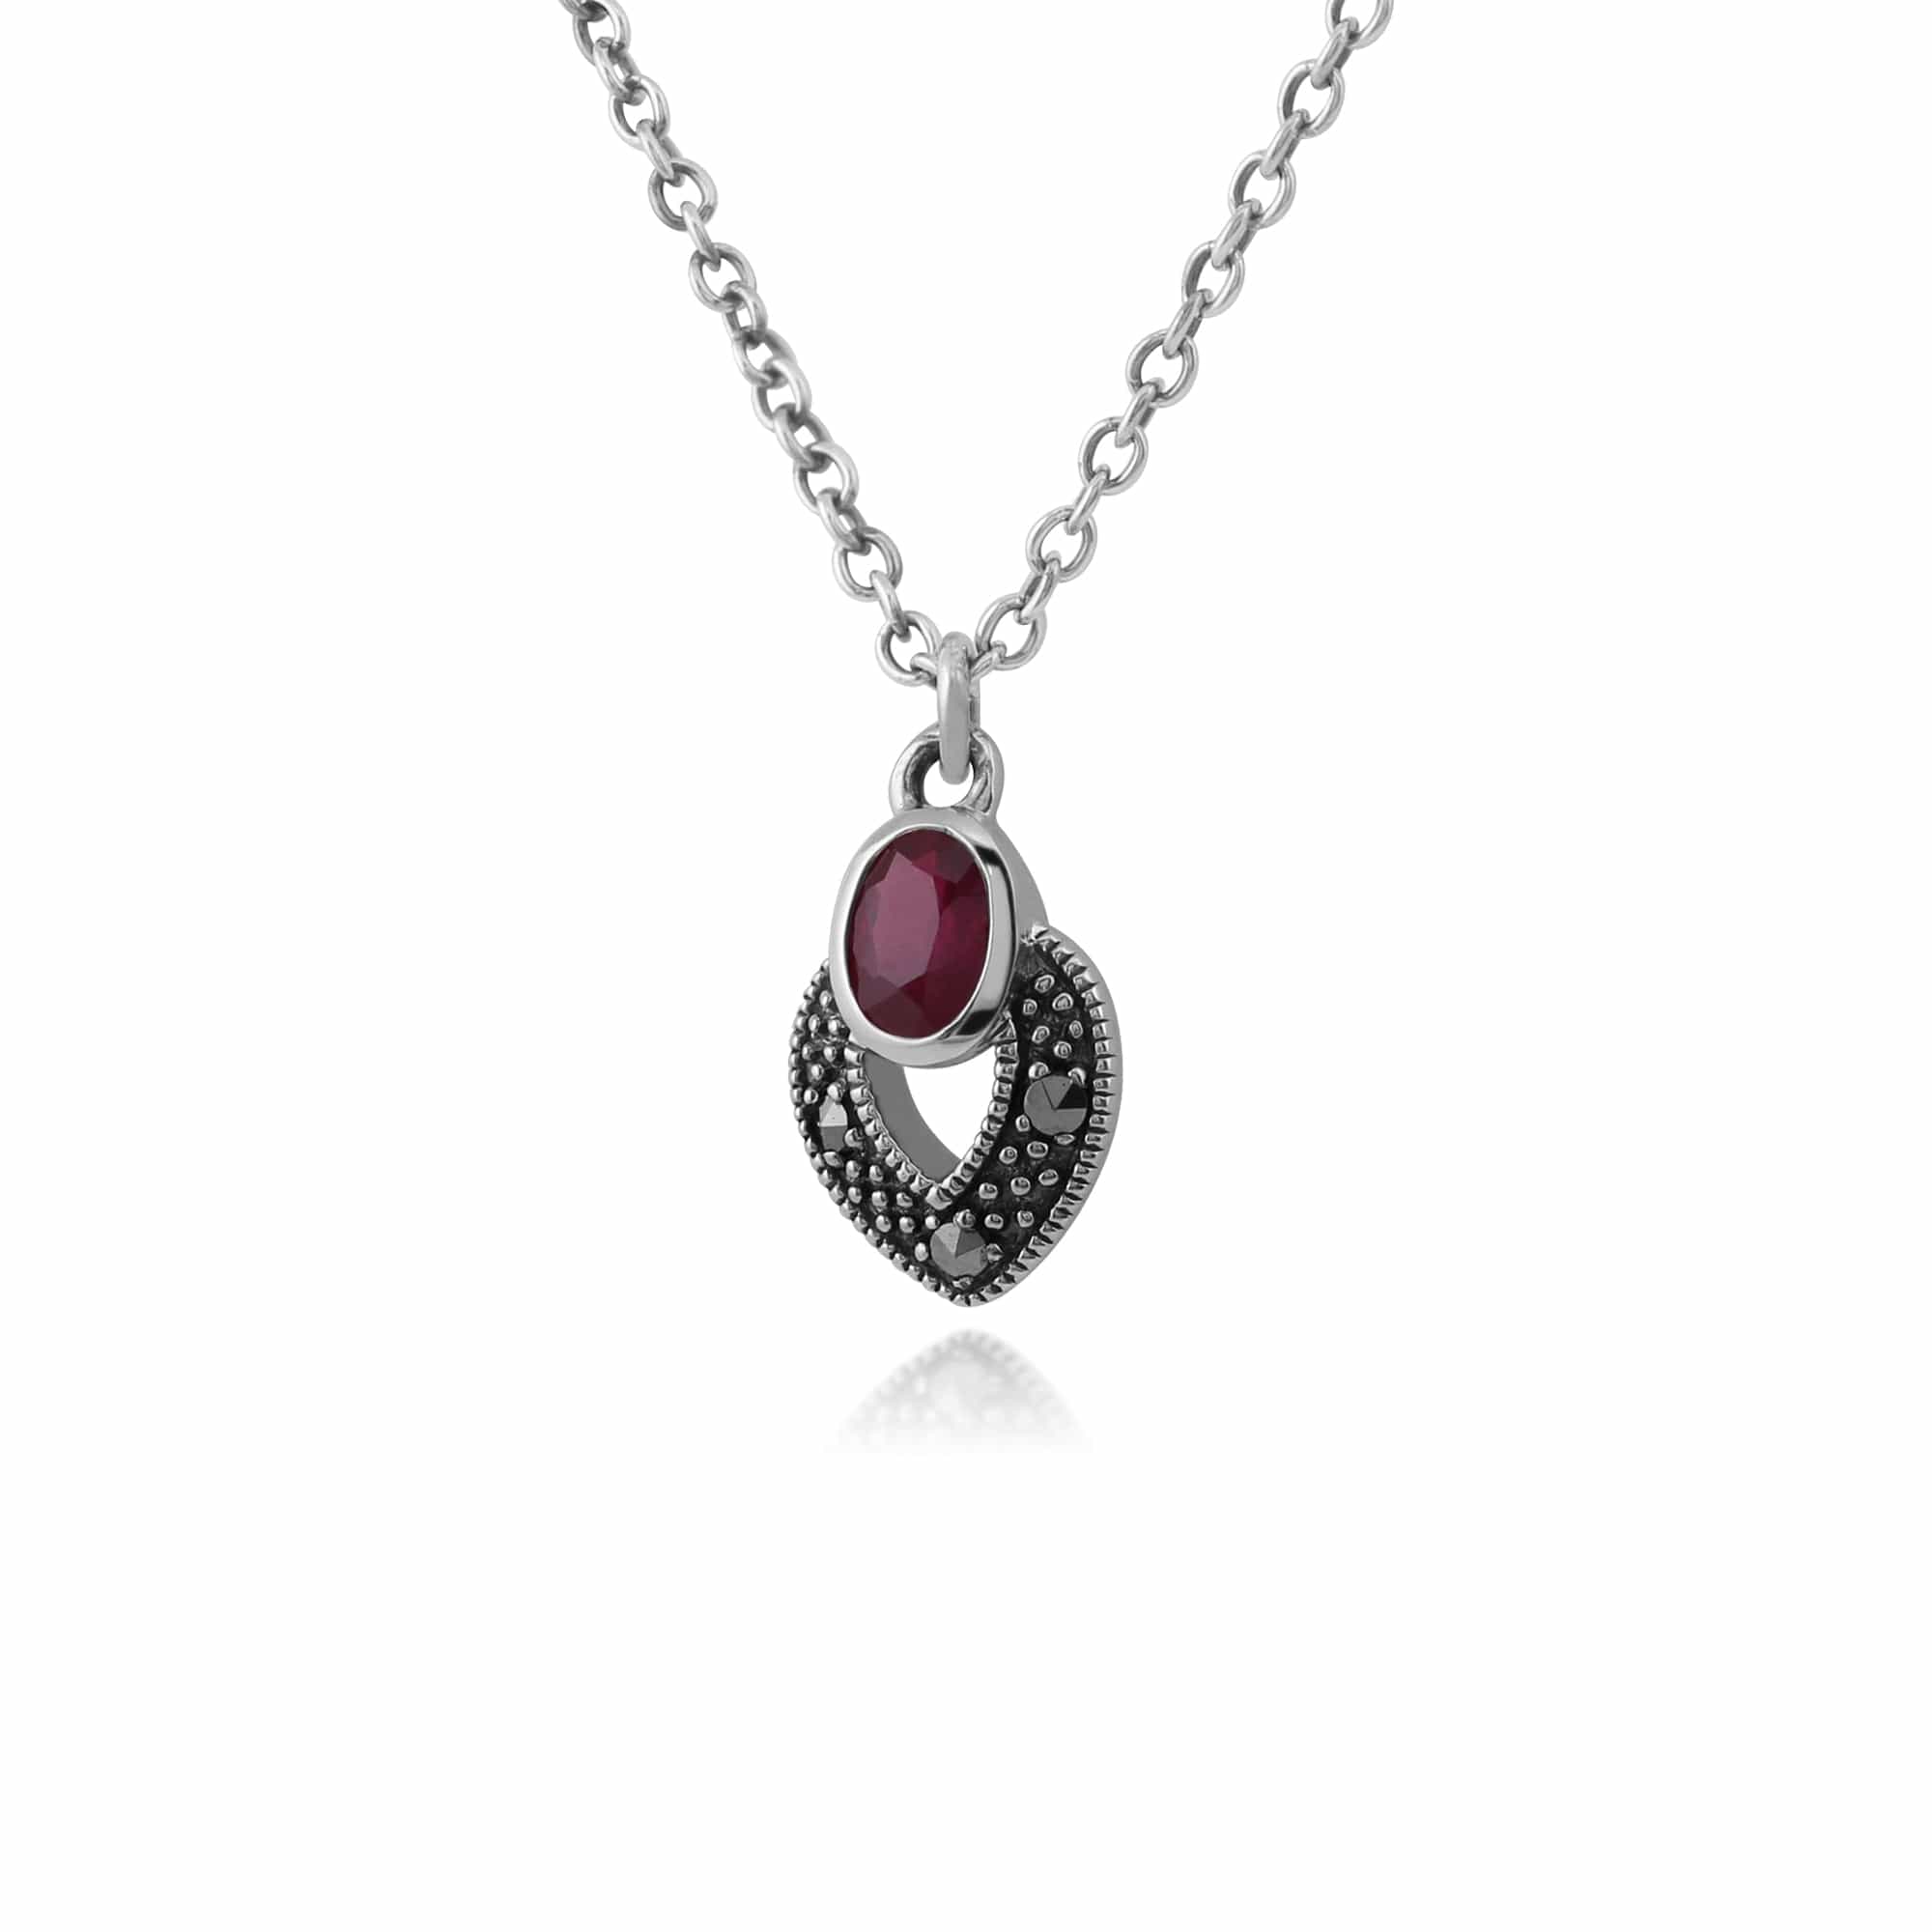 214N688211925 Art Deco Style Oval Ruby & Marcasite Necklace in 925 Sterling Silver 2